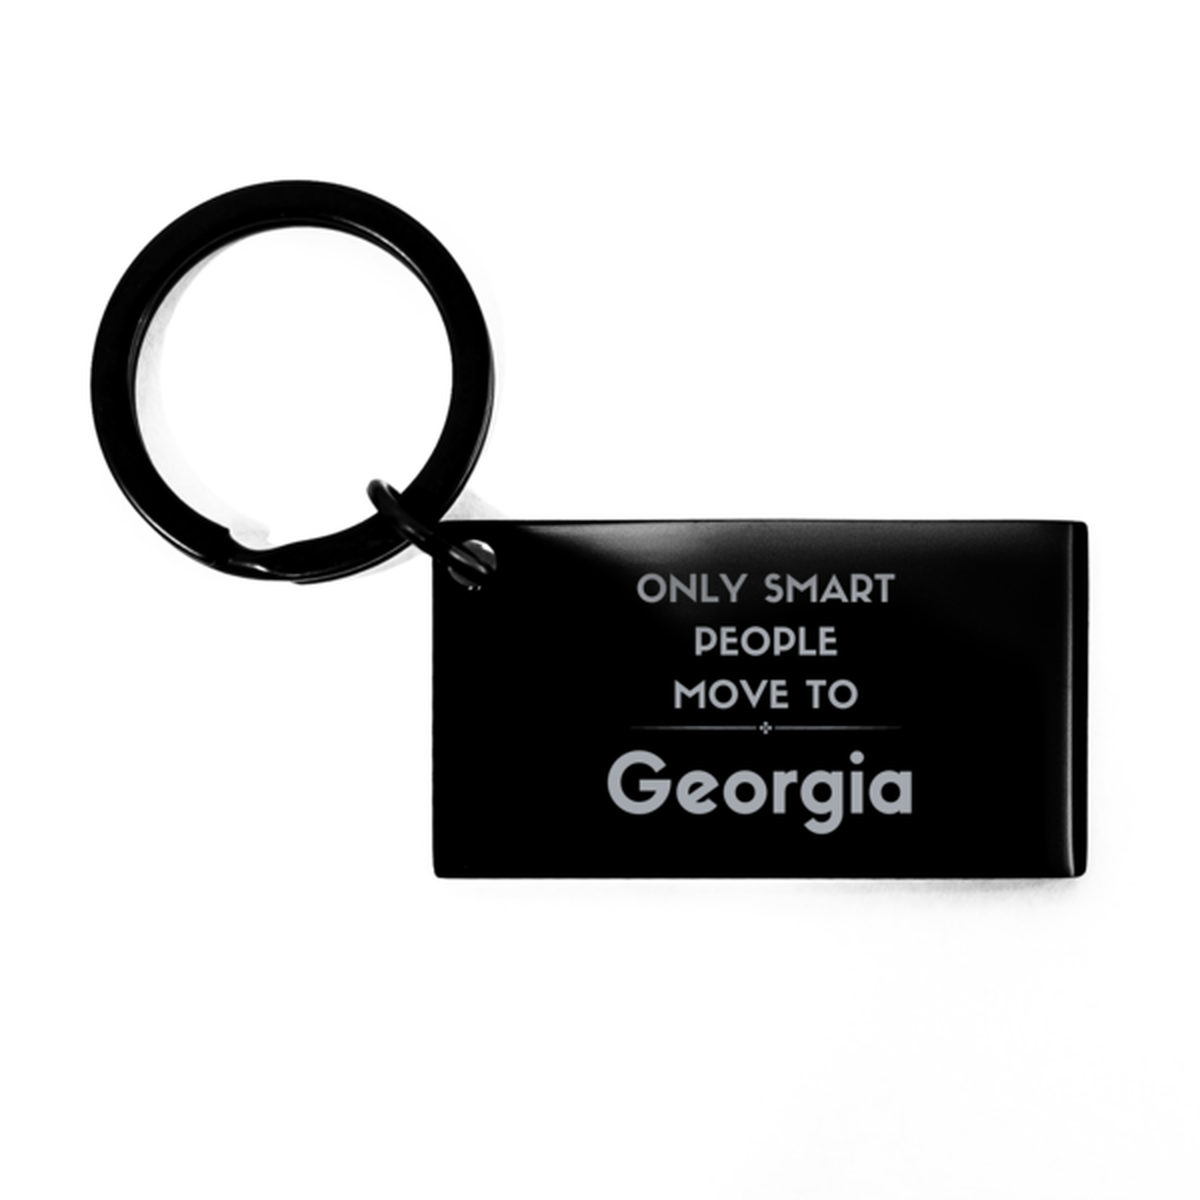 Only smart people move to Georgia Keychain, Gag Gifts For Georgia, Move to Georgia Gifts for Friends Coworker Funny Saying Quote